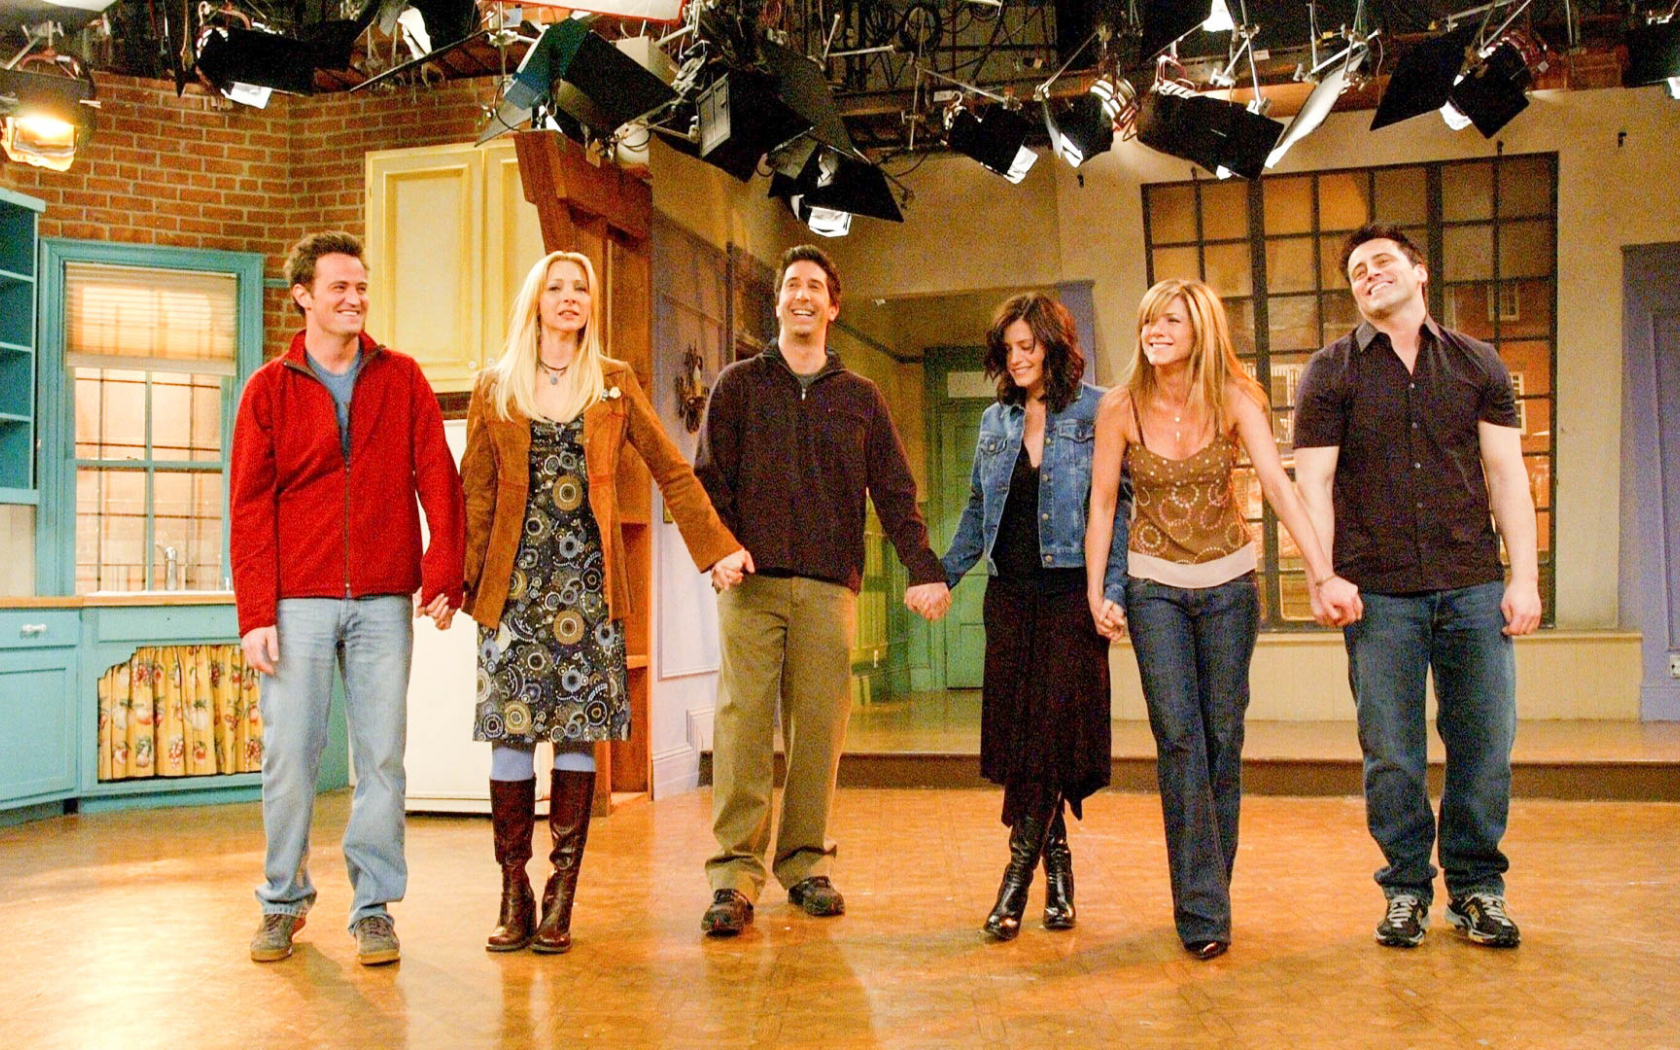 Free download Tv Show Friends Some Beautiful HD Wallpaper In High [1920x1080] for your Desktop, Mobile & Tablet. Explore Friends Tv Show Wallpaper. Funny TV Shows Wallpaper, Friends Wallpaper